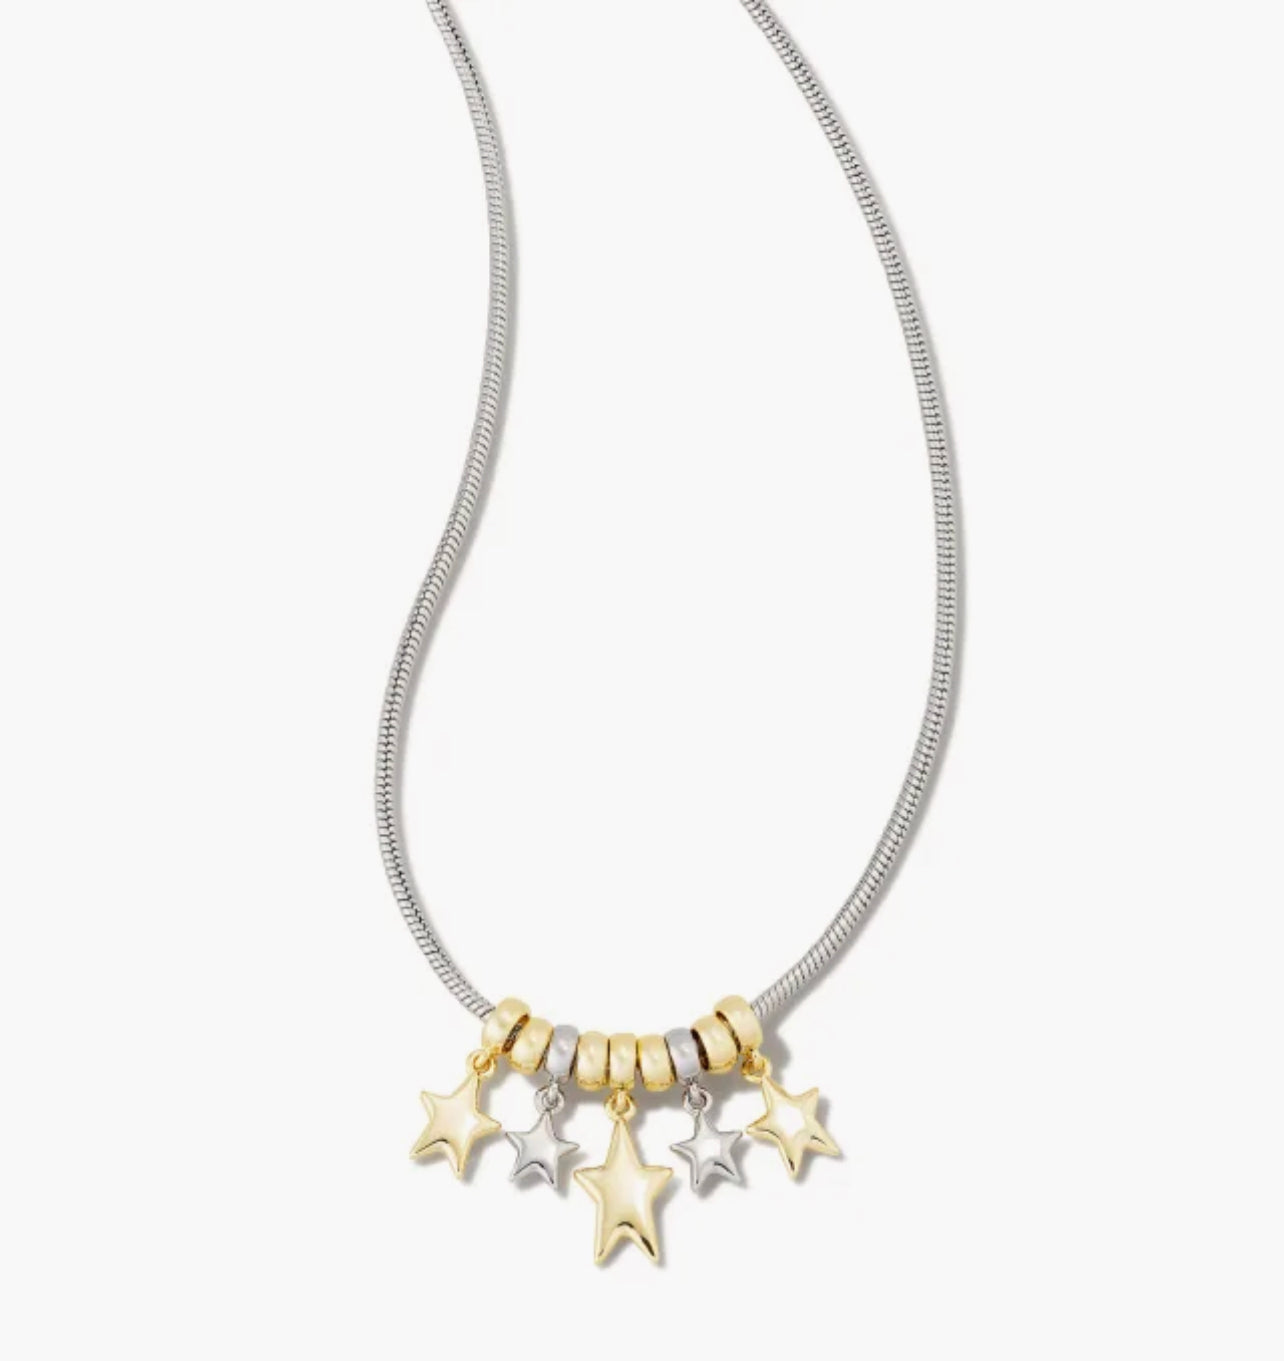 Brielle Convertible Gold Charm Necklace in Multi Mix